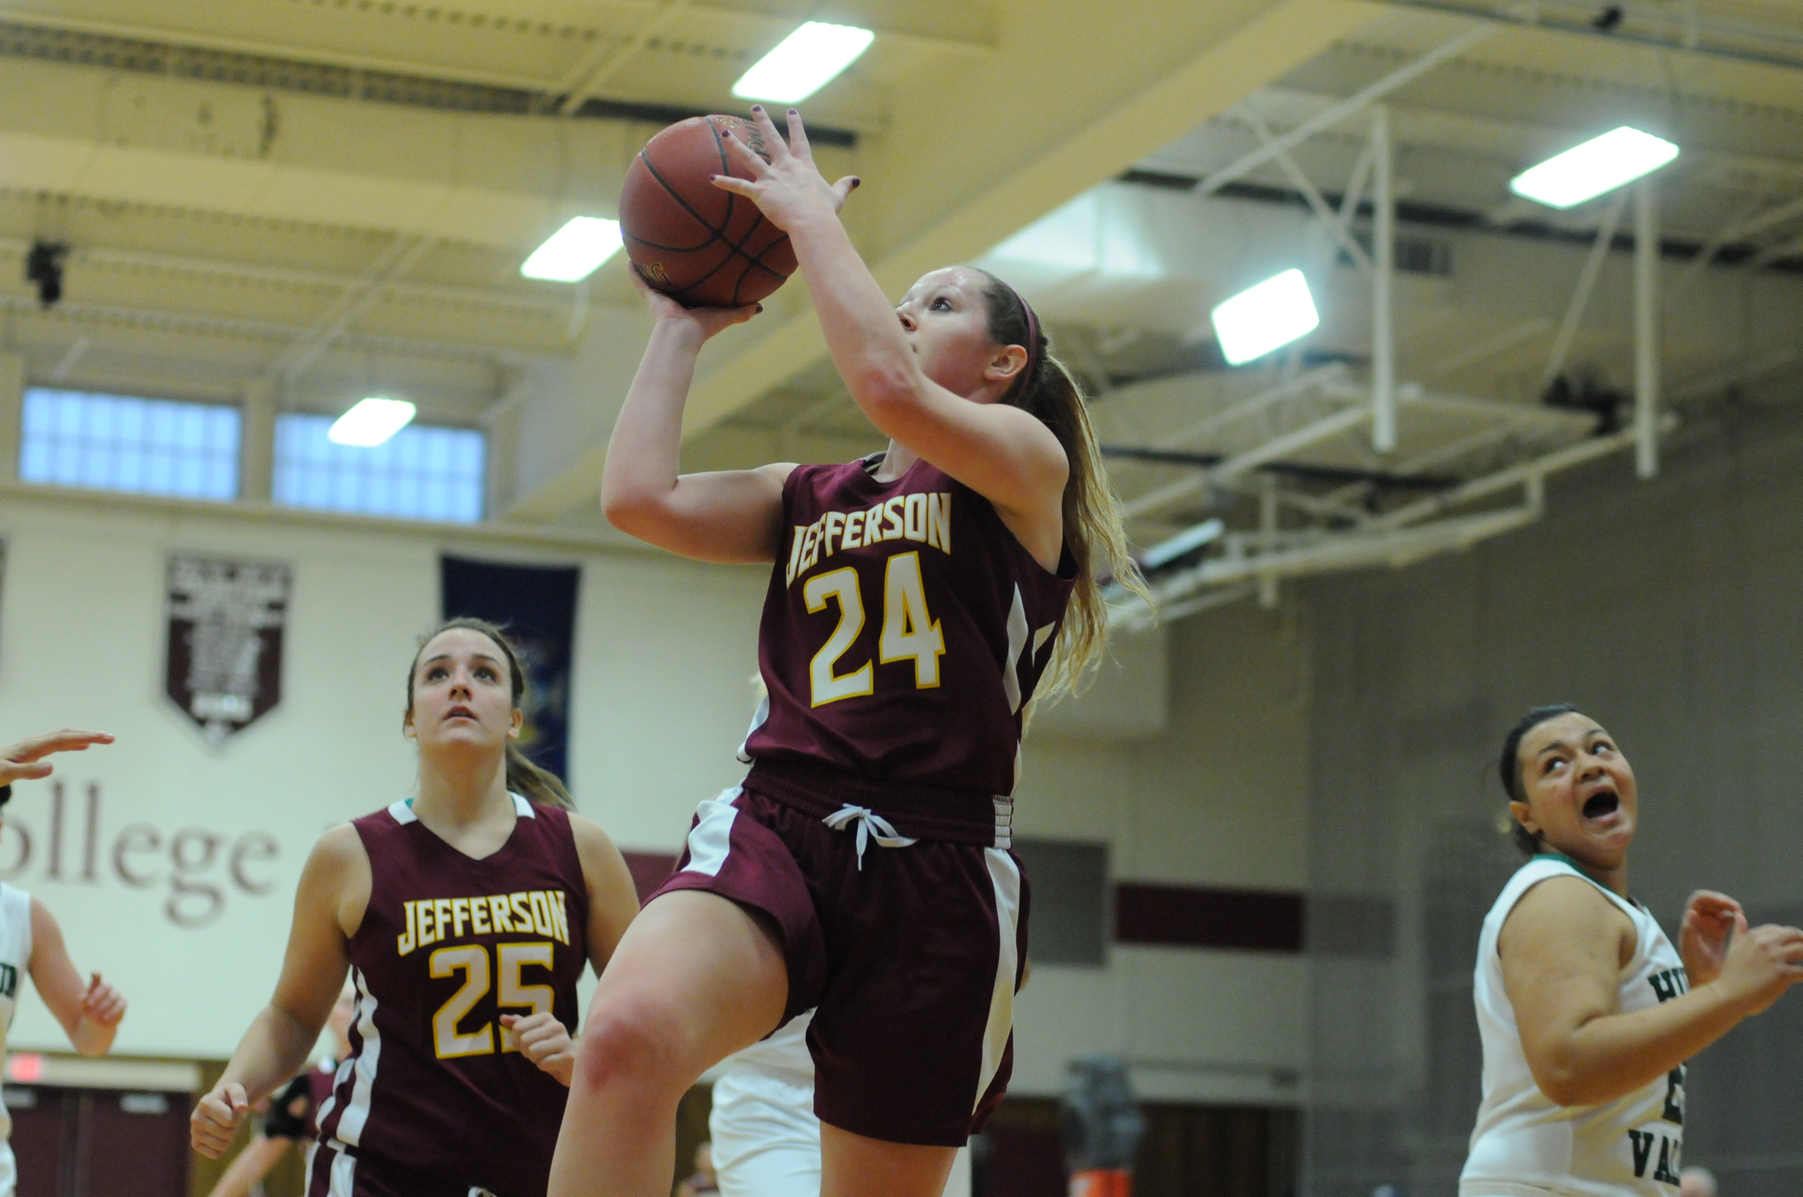 The Lady Cannoneers Fall in Home Opener but Bounce Back on Sunday